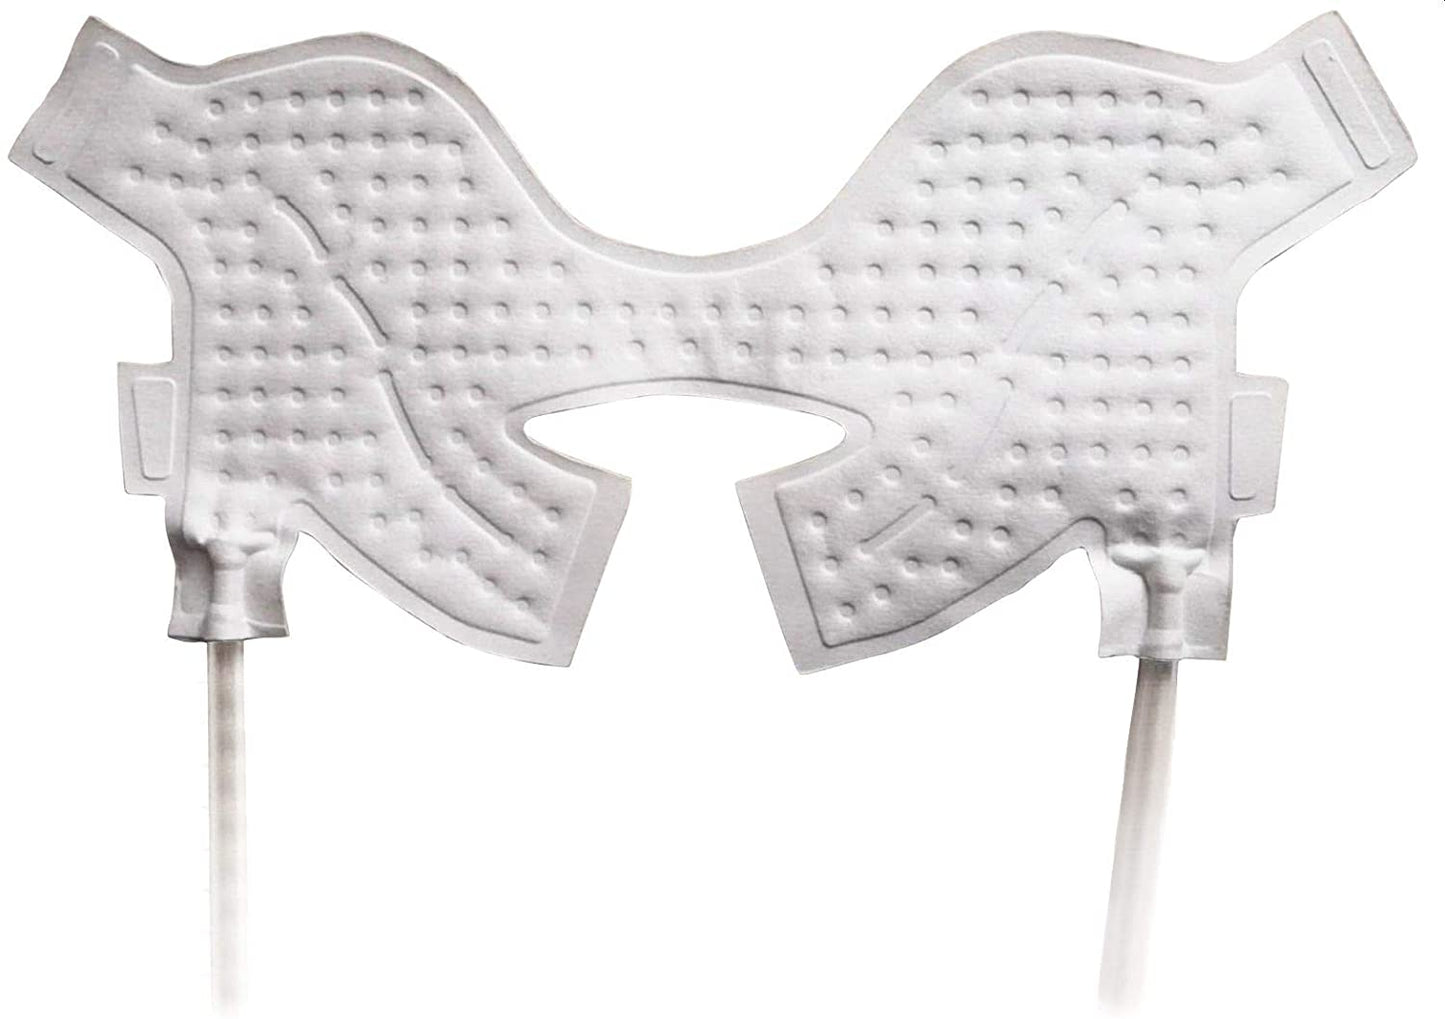 cold therapy pads